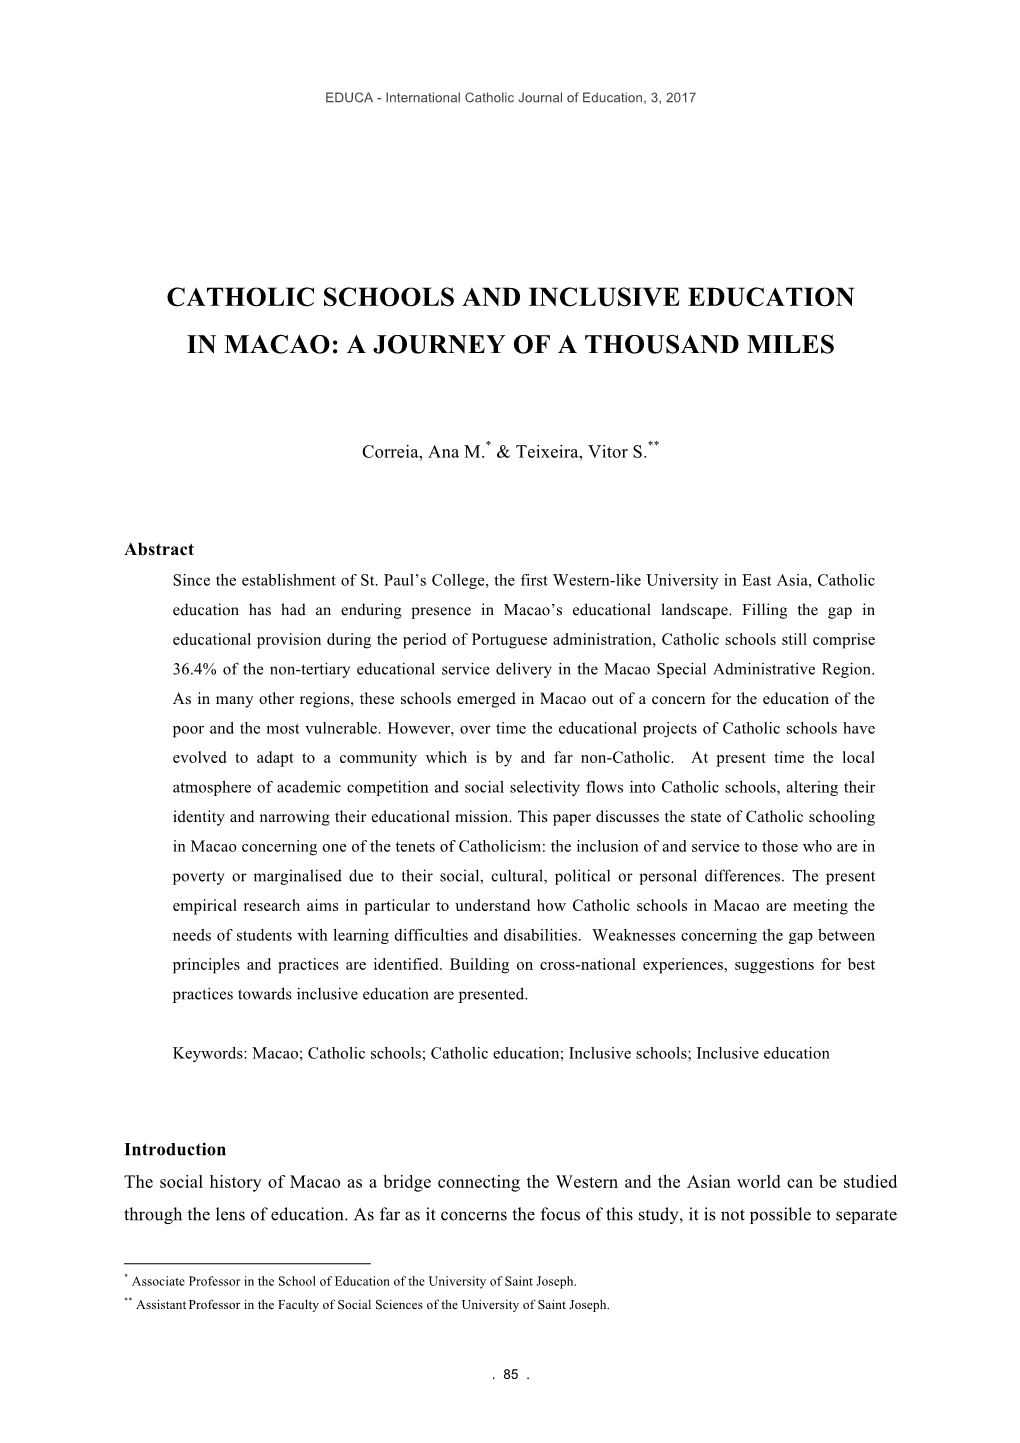 Catholic Schools and Inclusive Education in Macao: a Journey of a Thousand Miles